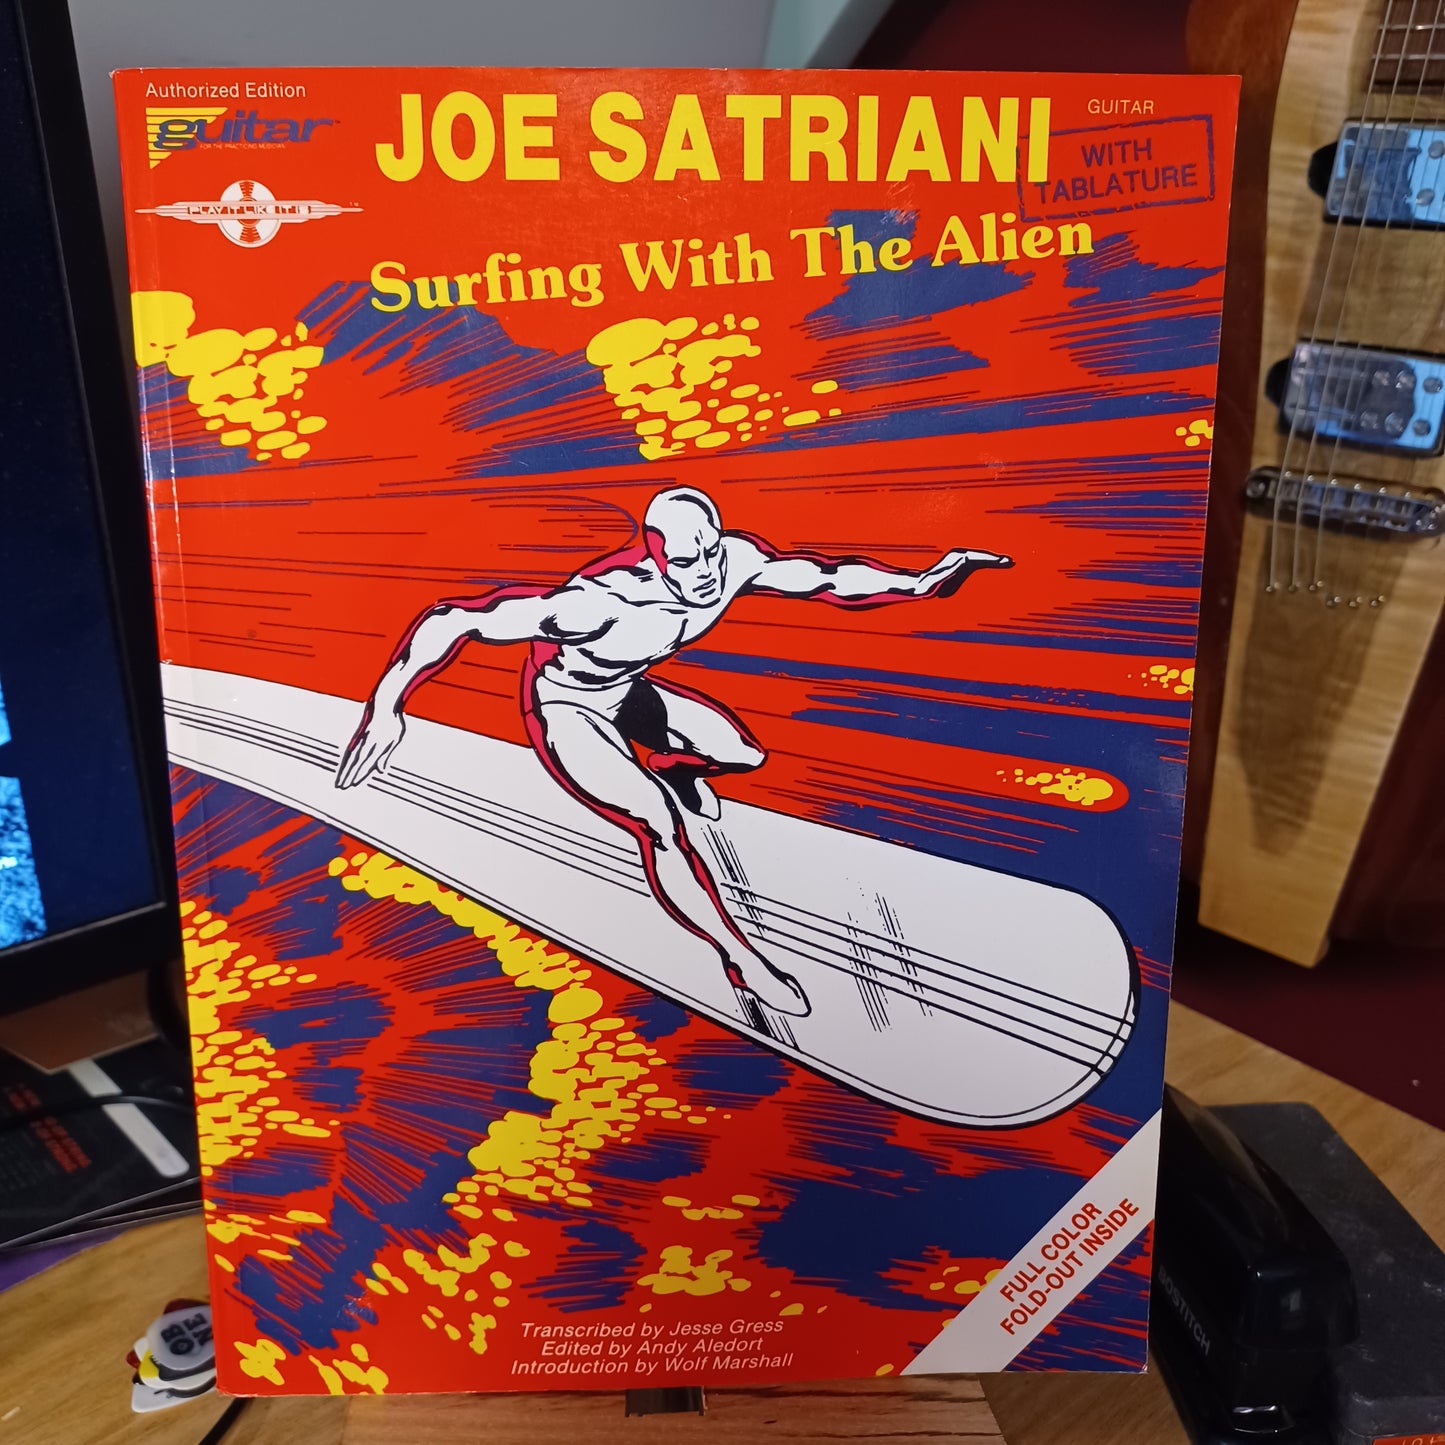 Joe Satriani Surfing with the Alien Tab book 1987 edition